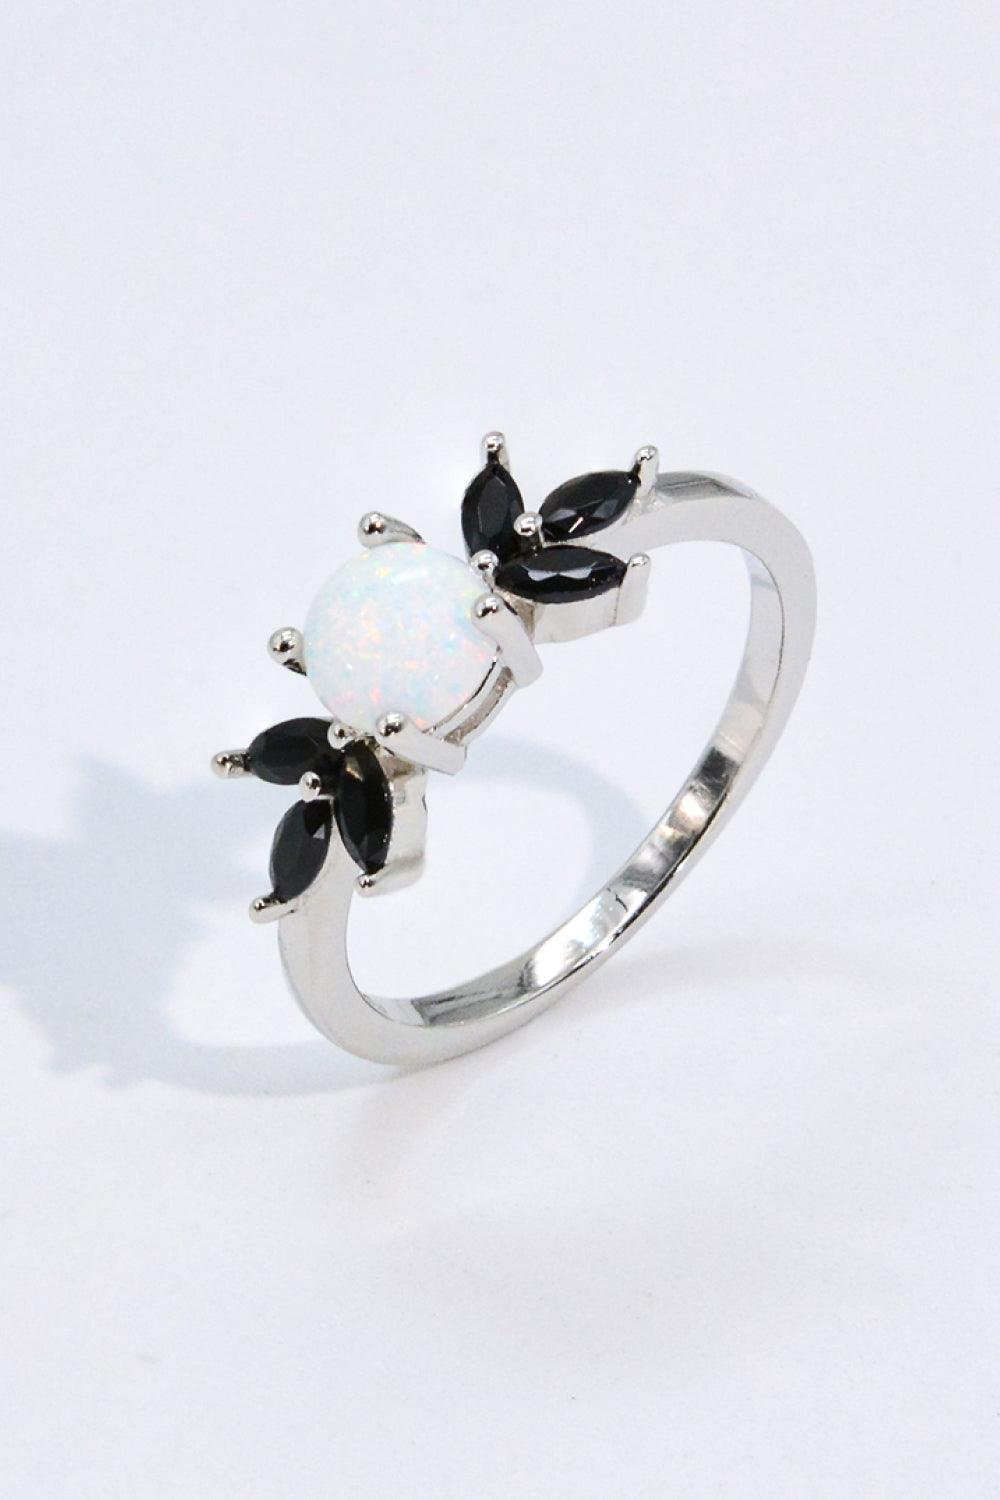 Opal and Zircon Contrast Ring - Flyclothing LLC